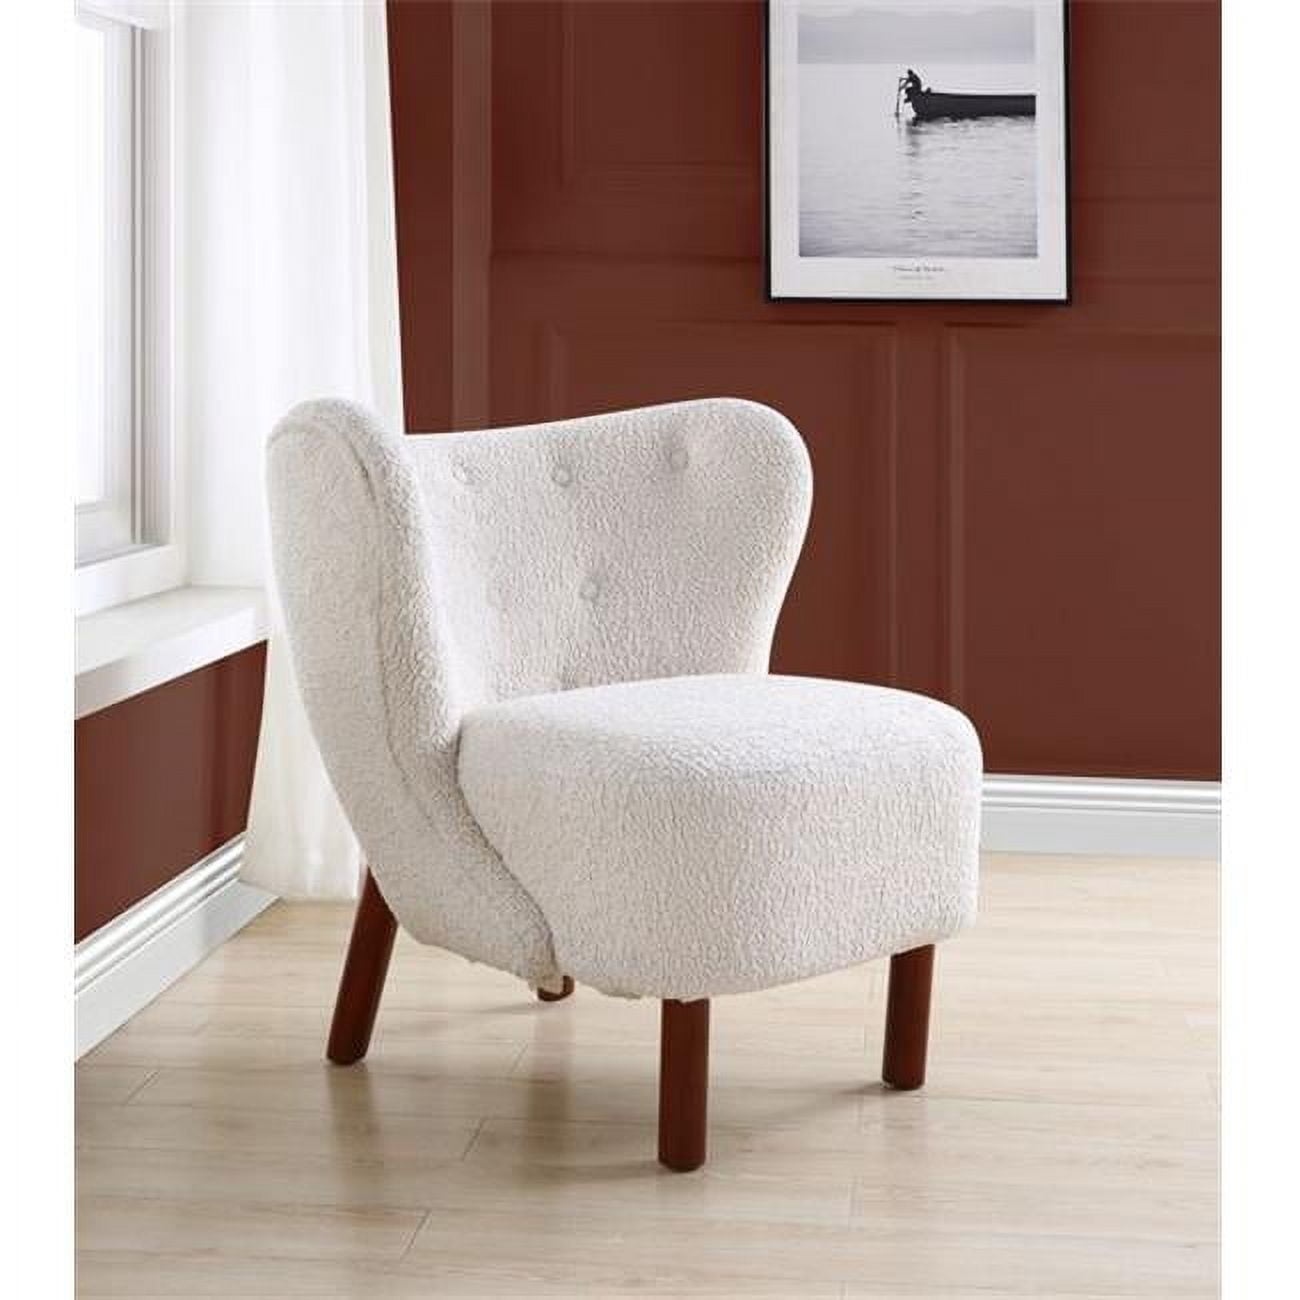 Picture of Acme Furniture AC00228 31 x 34 x 34 in. Zusud Accent Chair, White Teddy Sherpa